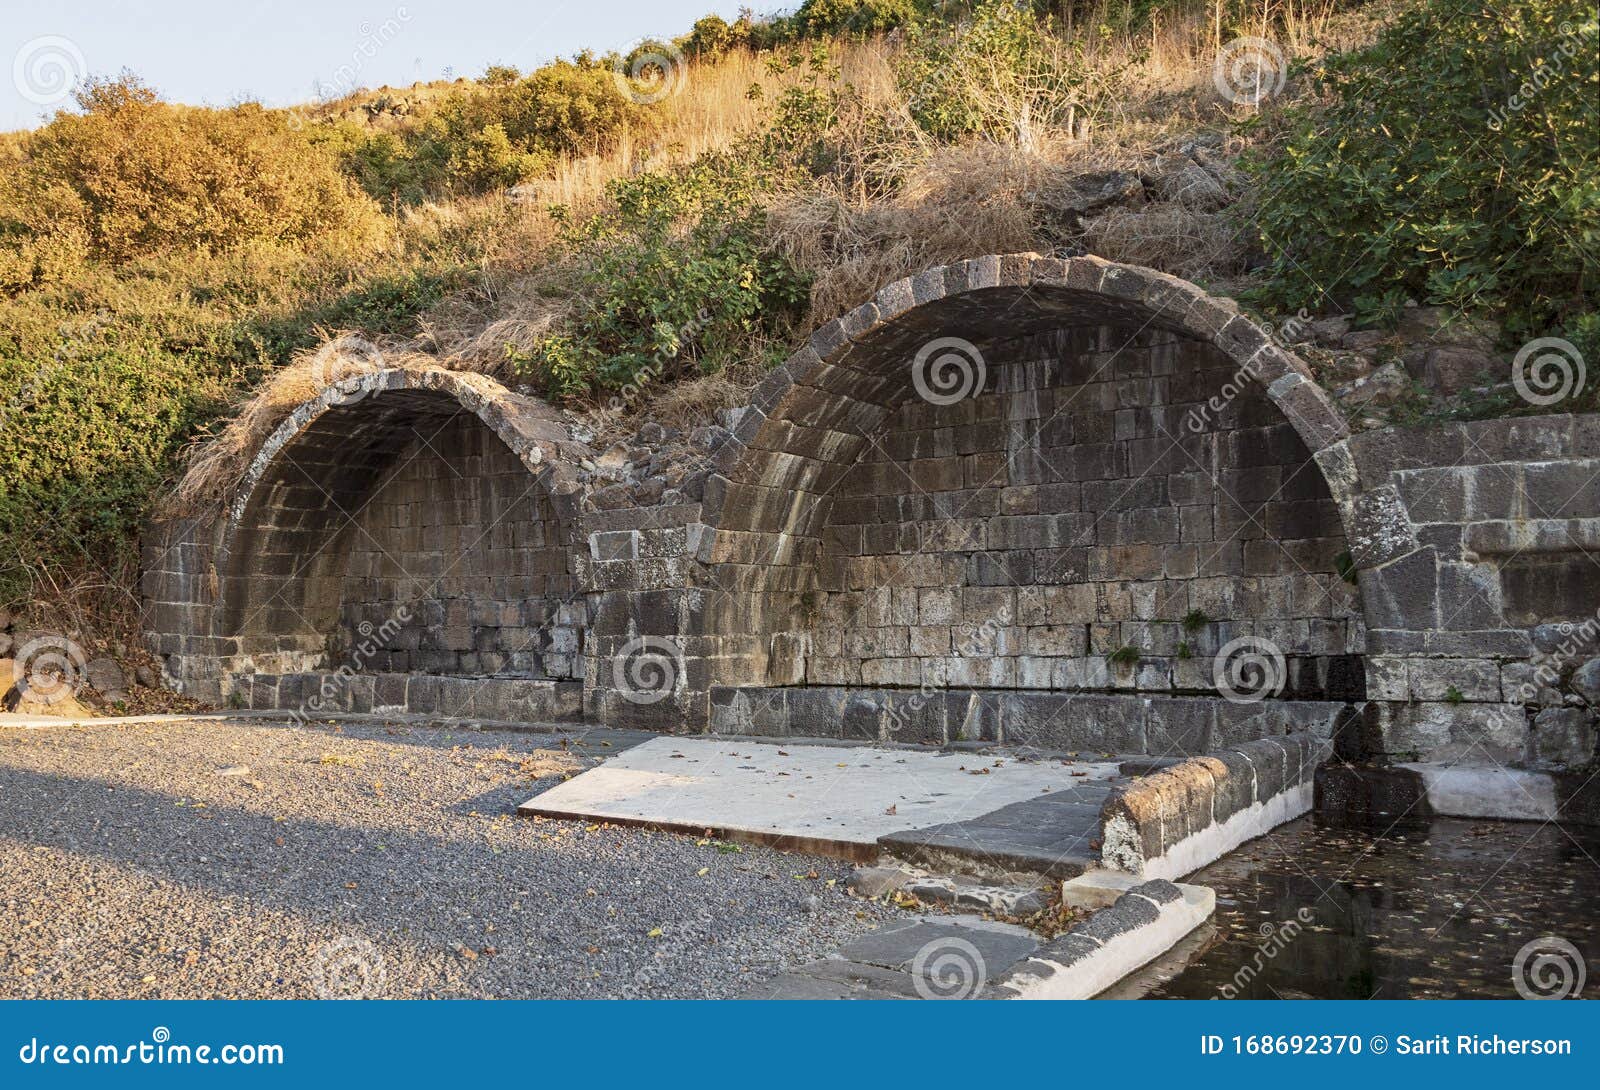 ancient arches over the springs near natur in the golan heights